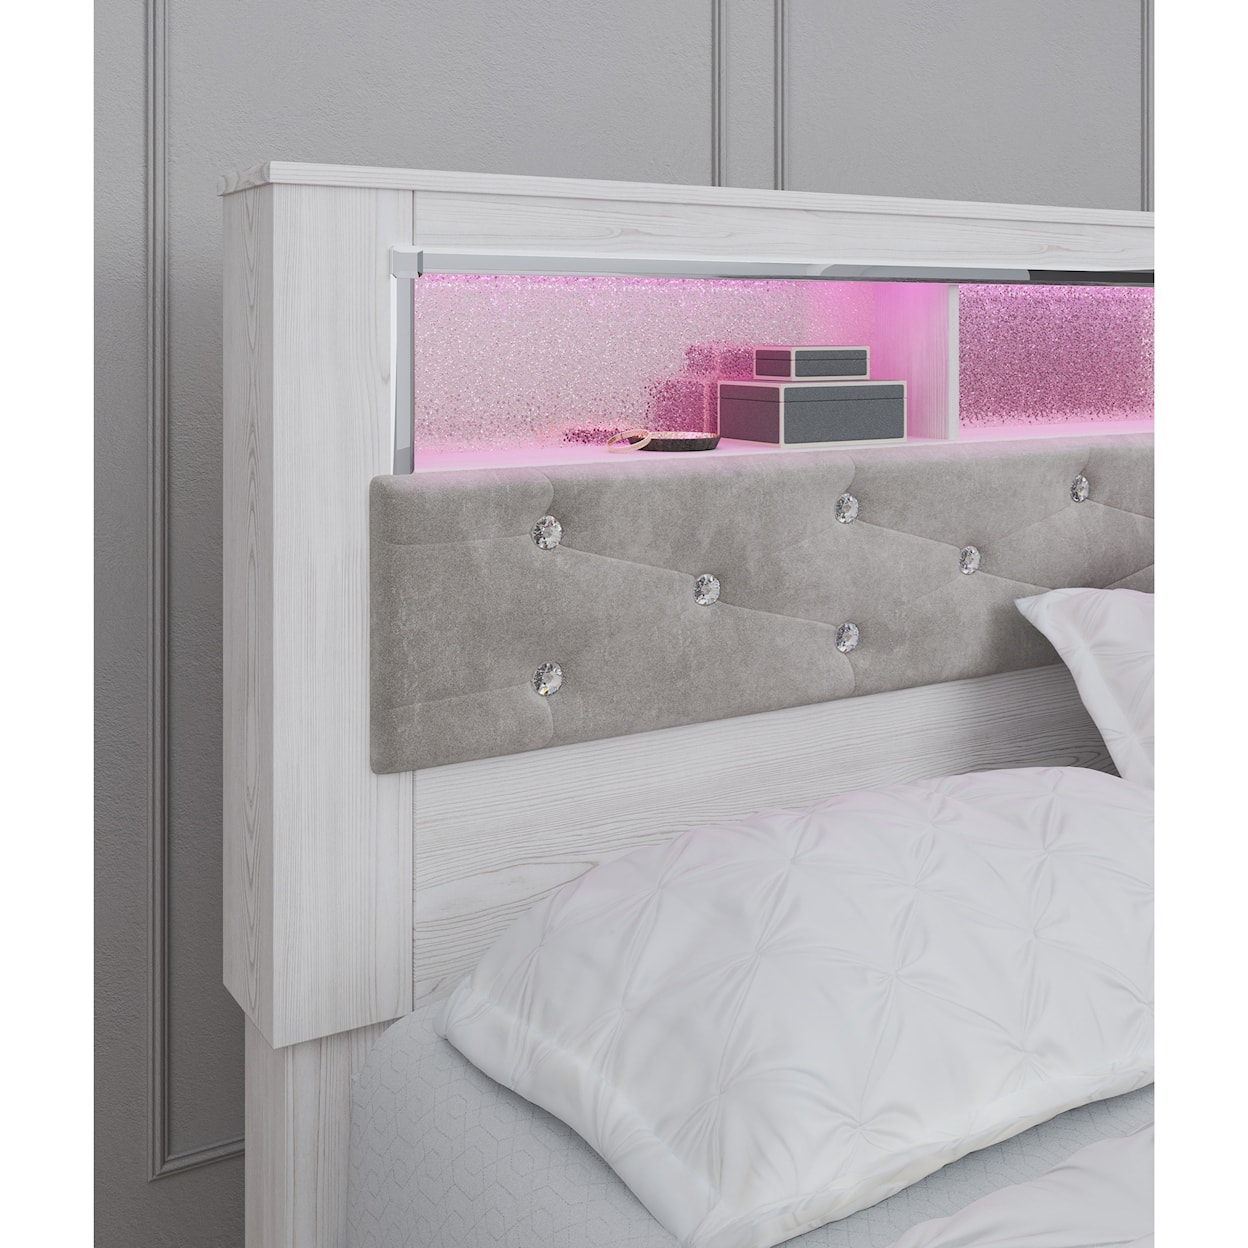 Michael Alan Select Altyra King Storage Bed with Uph Bookcase Hdbd